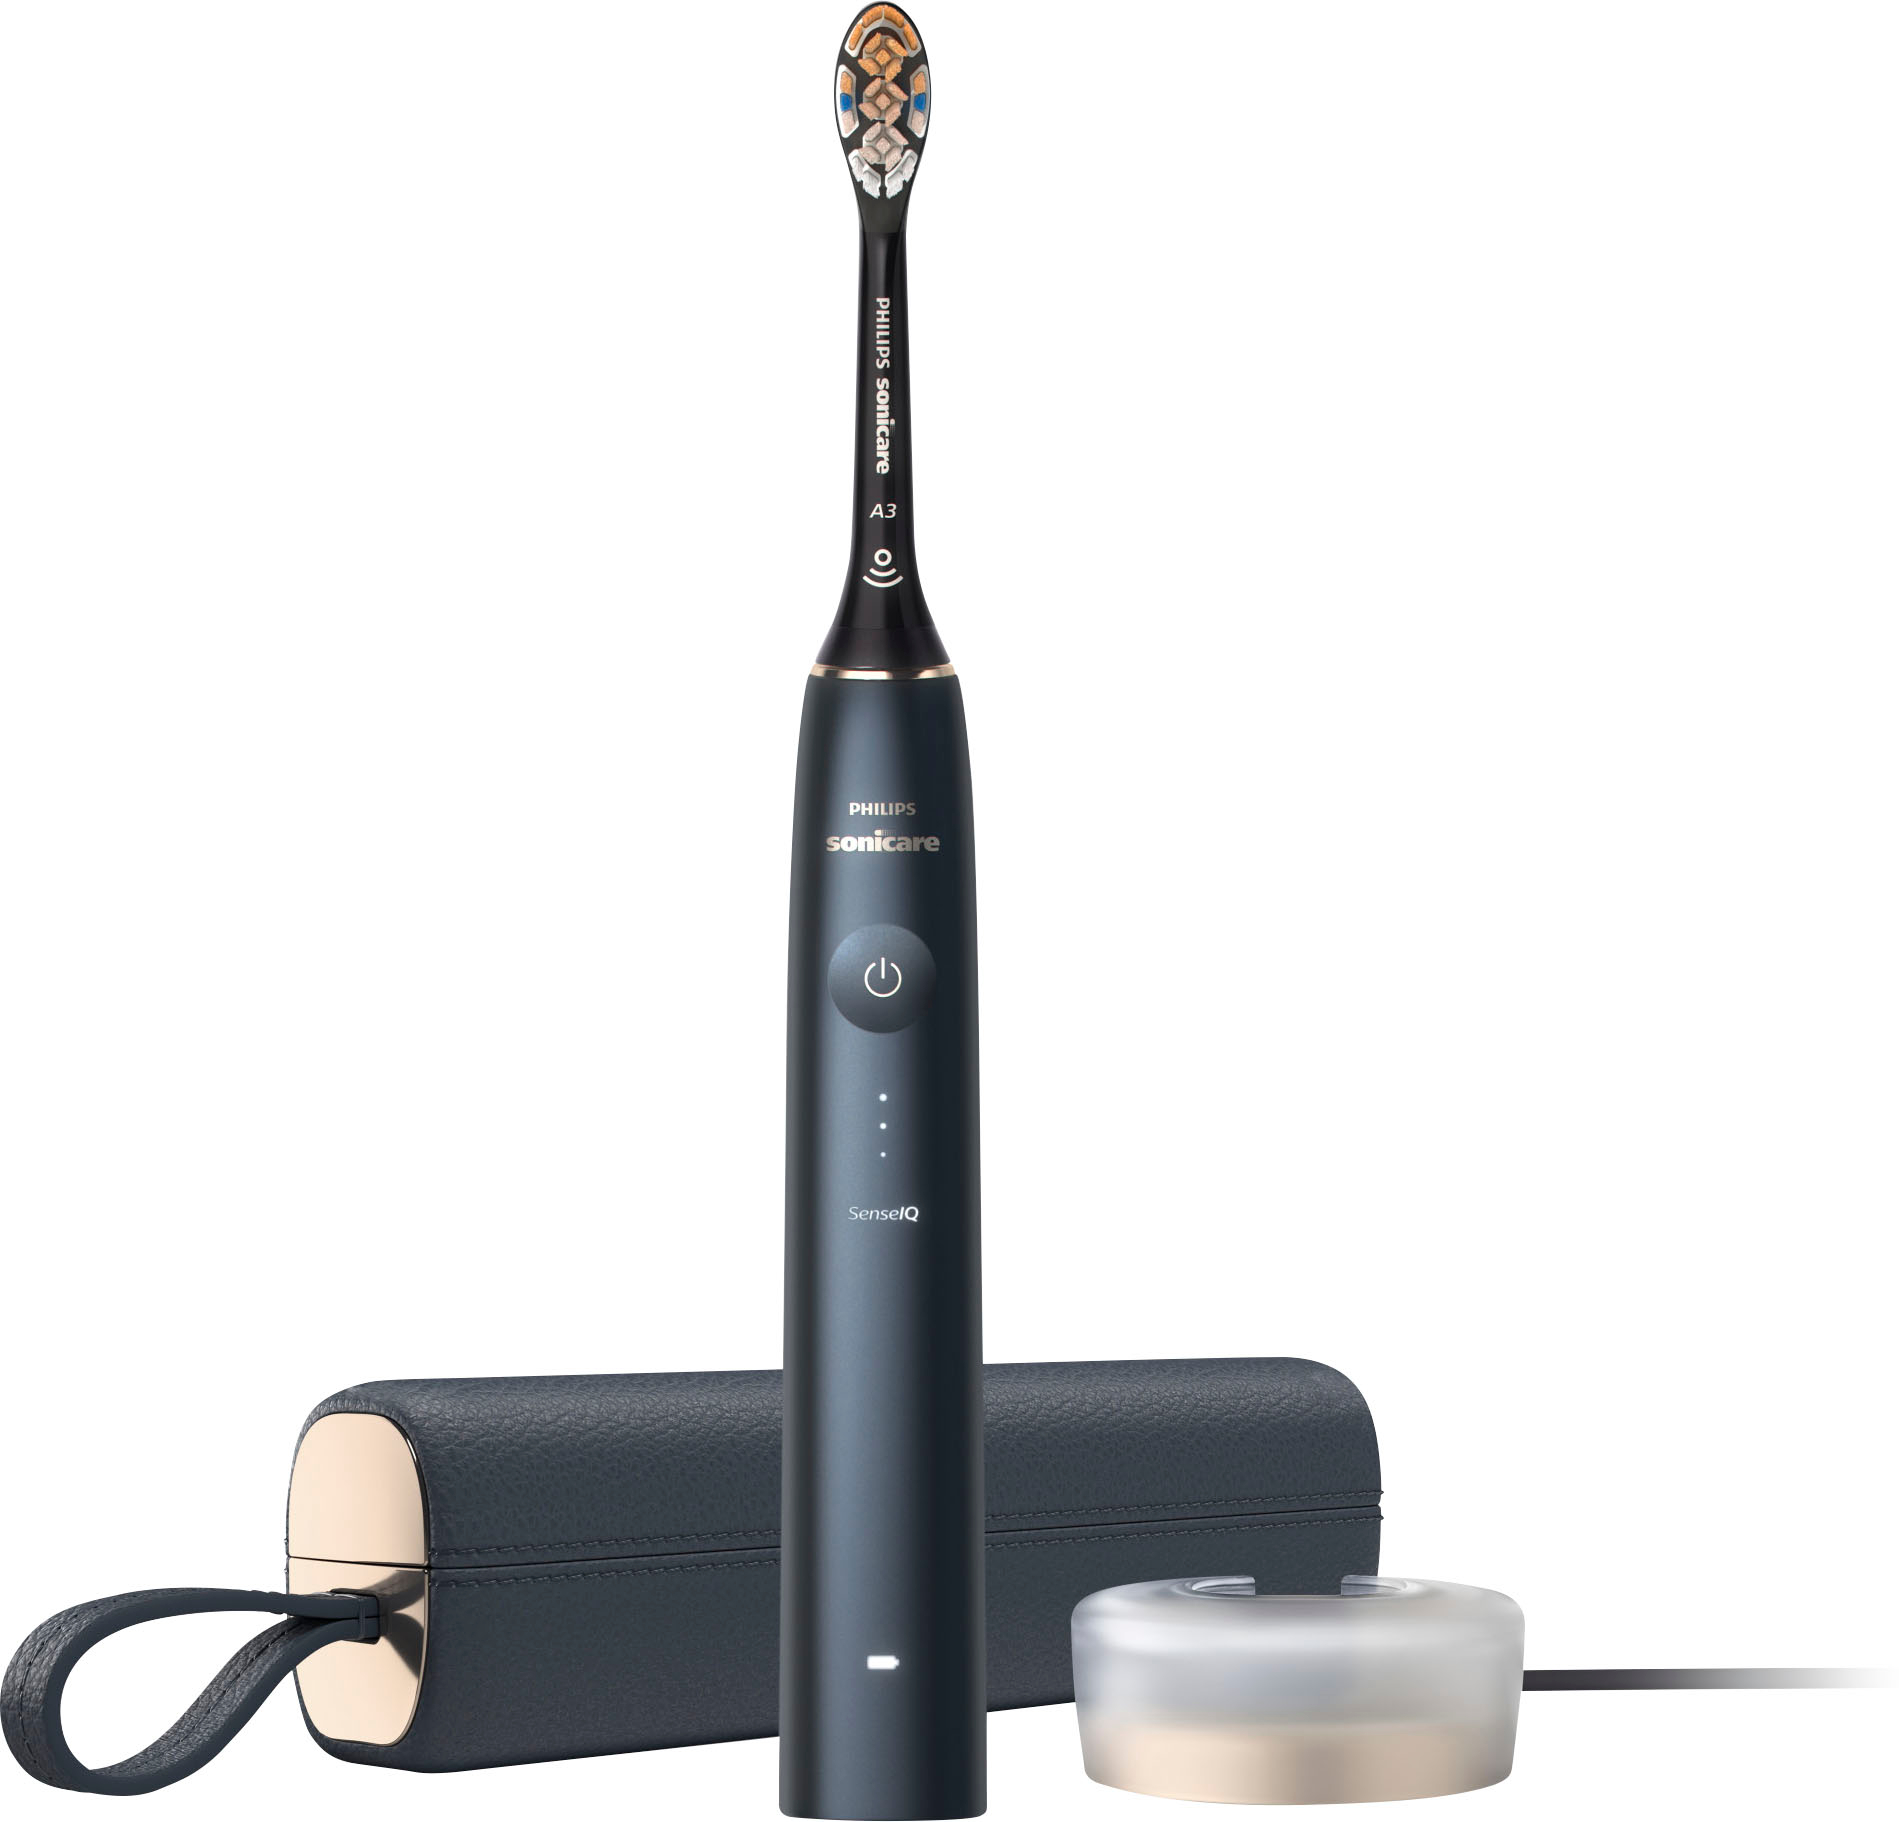 Philips Sonicare 9900 Prestige Rechargeable Electric Toothbrush with  SenseIQ, Midnight HX9990/12 - Midnight